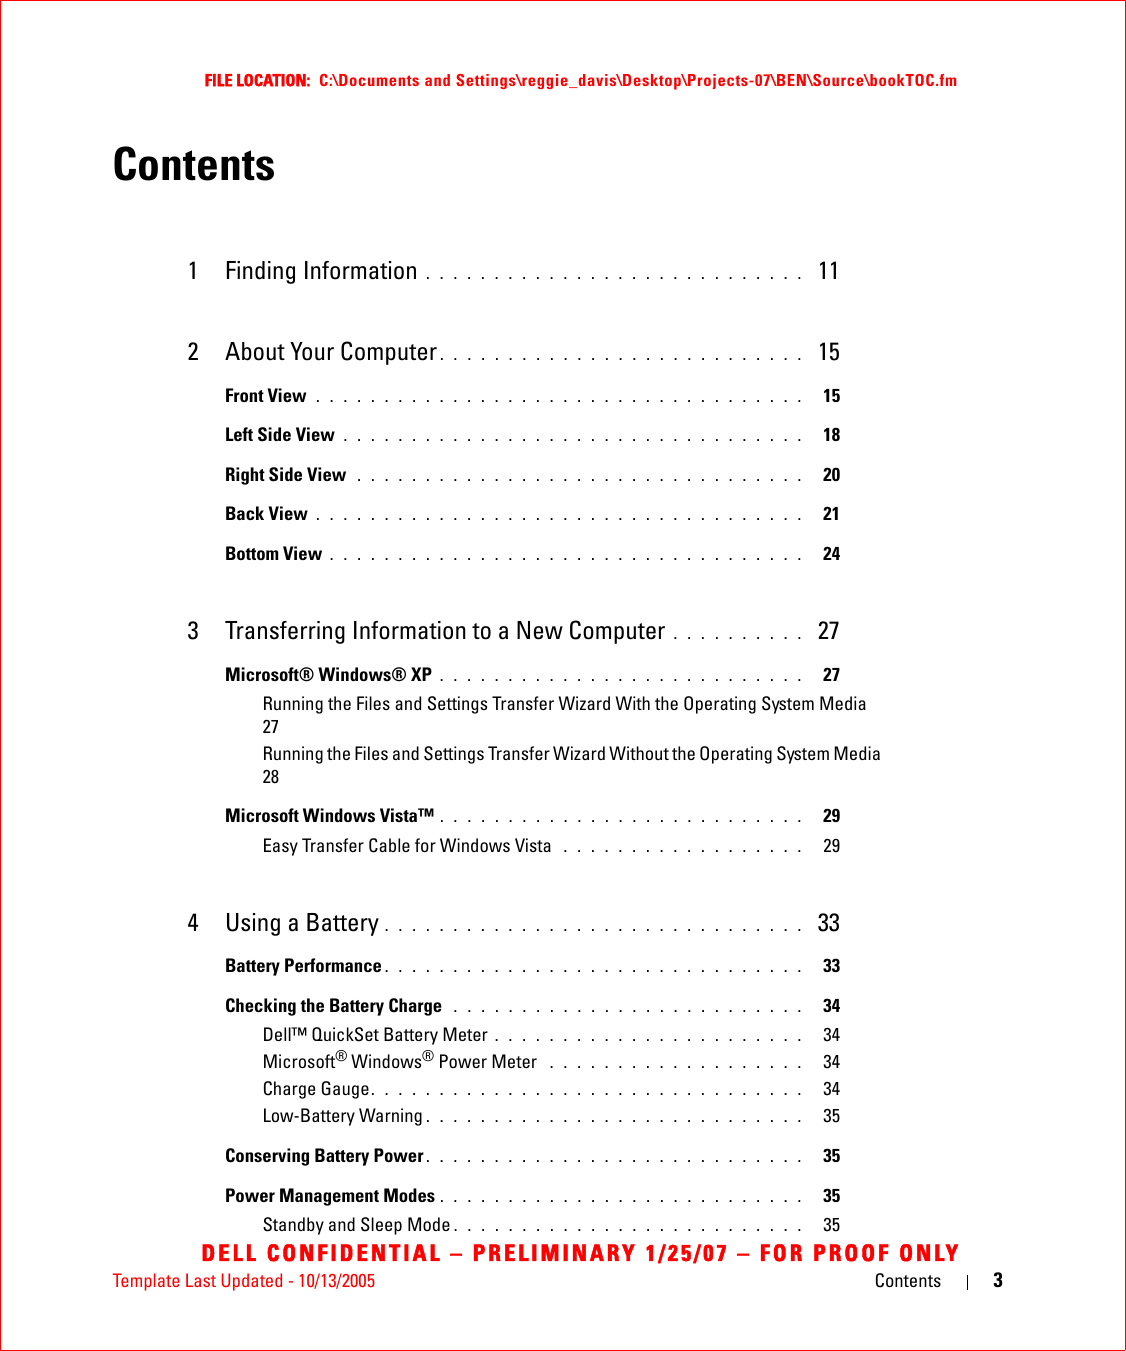 Template Last Updated - 10/13/2005 Contents 3FILE LOCATION:  C:\Documents and Settings\reggie_davis\Desktop\Projects-07\BEN\Source\bookTOC.fmDELL CONFIDENTIAL – PRELIMINARY 1/25/07 – FOR PROOF ONLYContents1 Finding Information . . . . . . . . . . . . . . . . . . . . . . . . . . . .  112 About Your Computer . . . . . . . . . . . . . . . . . . . . . . . . . . .  15Front View . . . . . . . . . . . . . . . . . . . . . . . . . . . . . . . . . . . .   15Left Side View . . . . . . . . . . . . . . . . . . . . . . . . . . . . . . . . . .   18Right Side View  . . . . . . . . . . . . . . . . . . . . . . . . . . . . . . . . .   20Back View . . . . . . . . . . . . . . . . . . . . . . . . . . . . . . . . . . . .   21Bottom View . . . . . . . . . . . . . . . . . . . . . . . . . . . . . . . . . . .   243 Transferring Information to a New Computer . . . . . . . . . .  27Microsoft® Windows® XP . . . . . . . . . . . . . . . . . . . . . . . . . . .   27Running the Files and Settings Transfer Wizard With the Operating System Media  27Running the Files and Settings Transfer Wizard Without the Operating System Media  28Microsoft Windows Vista™ . . . . . . . . . . . . . . . . . . . . . . . . . . .   29Easy Transfer Cable for Windows Vista  . . . . . . . . . . . . . . . . . .   294 Using a Battery . . . . . . . . . . . . . . . . . . . . . . . . . . . . . . .  33Battery Performance . . . . . . . . . . . . . . . . . . . . . . . . . . . . . . .   33Checking the Battery Charge  . . . . . . . . . . . . . . . . . . . . . . . . . .   34Dell™ QuickSet Battery Meter . . . . . . . . . . . . . . . . . . . . . . .   34Microsoft® Windows® Power Meter  . . . . . . . . . . . . . . . . . . .   34Charge Gauge. . . . . . . . . . . . . . . . . . . . . . . . . . . . . . . .   34Low-Battery Warning . . . . . . . . . . . . . . . . . . . . . . . . . . . .   35Conserving Battery Power . . . . . . . . . . . . . . . . . . . . . . . . . . . .   35Power Management Modes . . . . . . . . . . . . . . . . . . . . . . . . . . .   35Standby and Sleep Mode . . . . . . . . . . . . . . . . . . . . . . . . . .   35